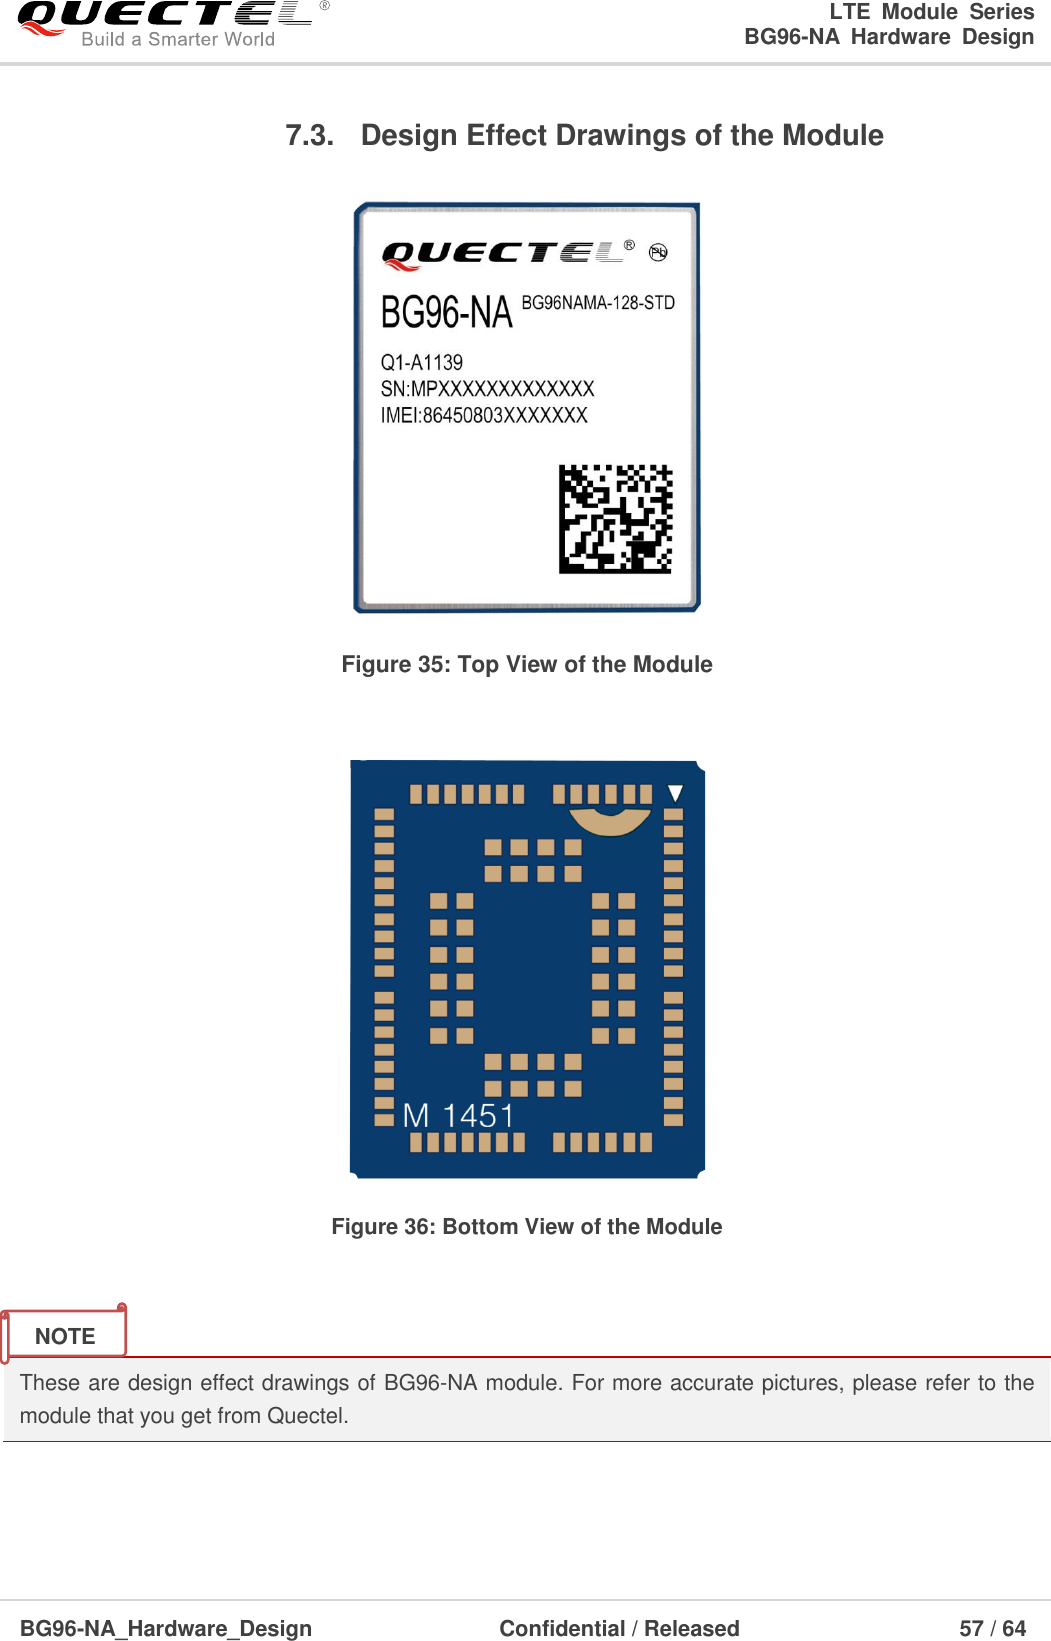 LTE  Module  Series                                                  BG96-NA  Hardware  Design  BG96-NA_Hardware_Design                              Confidential / Released                                  57 / 64    7.3.  Design Effect Drawings of the Module  Figure 35: Top View of the Module   Figure 36: Bottom View of the Module   These are design effect drawings of BG96-NA module. For more accurate pictures, please refer to the module that you get from Quectel.    NOTE 